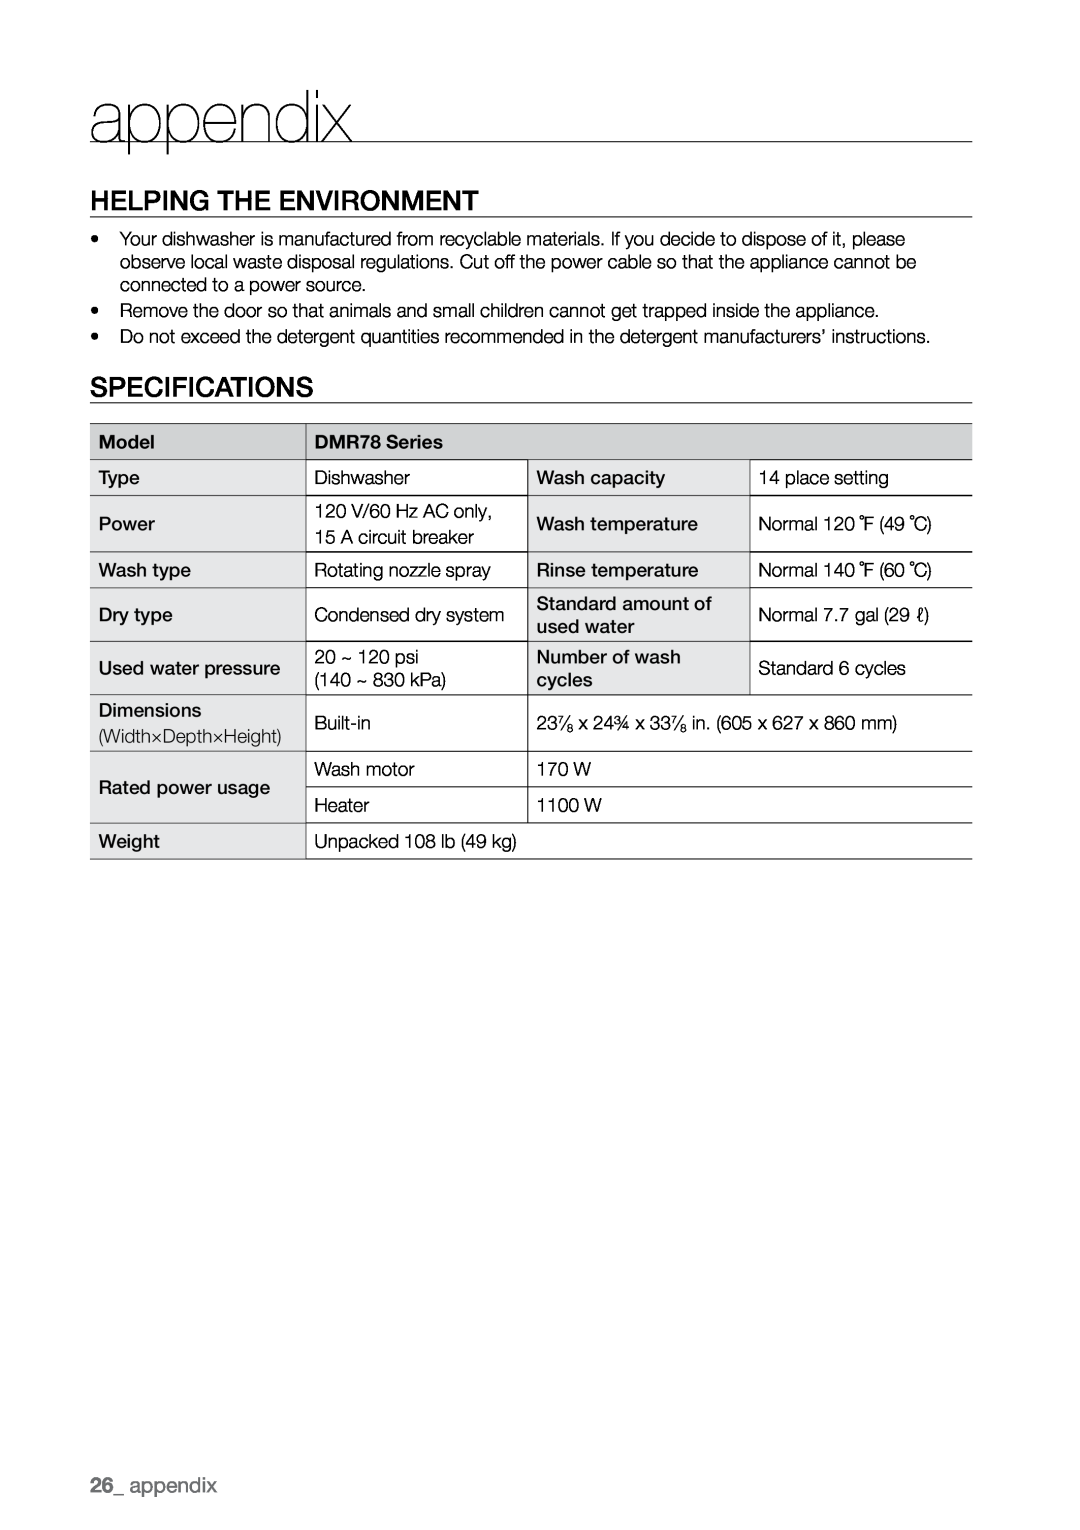 Samsung manual appendix, Helping the environment, Specifications, Model, DMR78 Series 